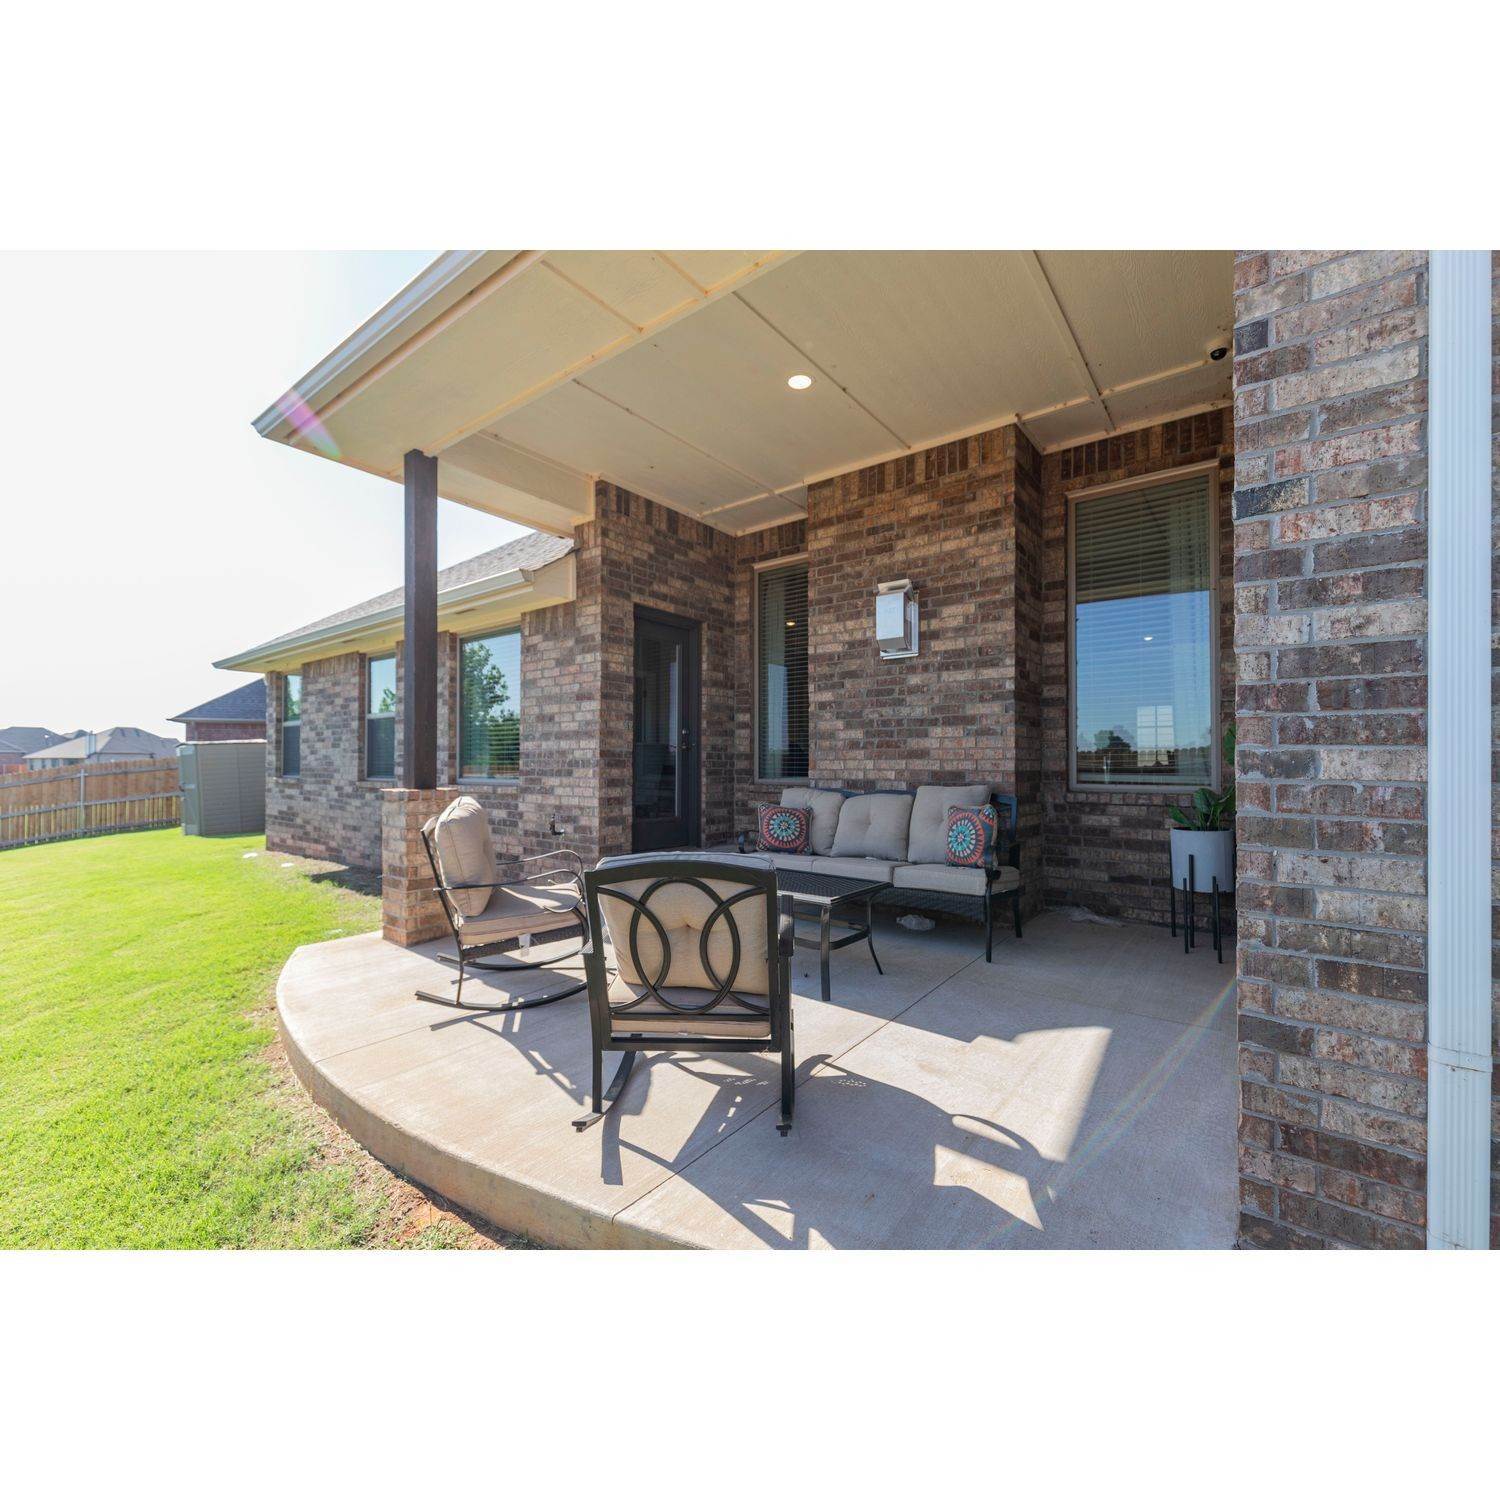 46. Canyons bâtiment à 10533 SW 52nd St, Mustang, OK 73064